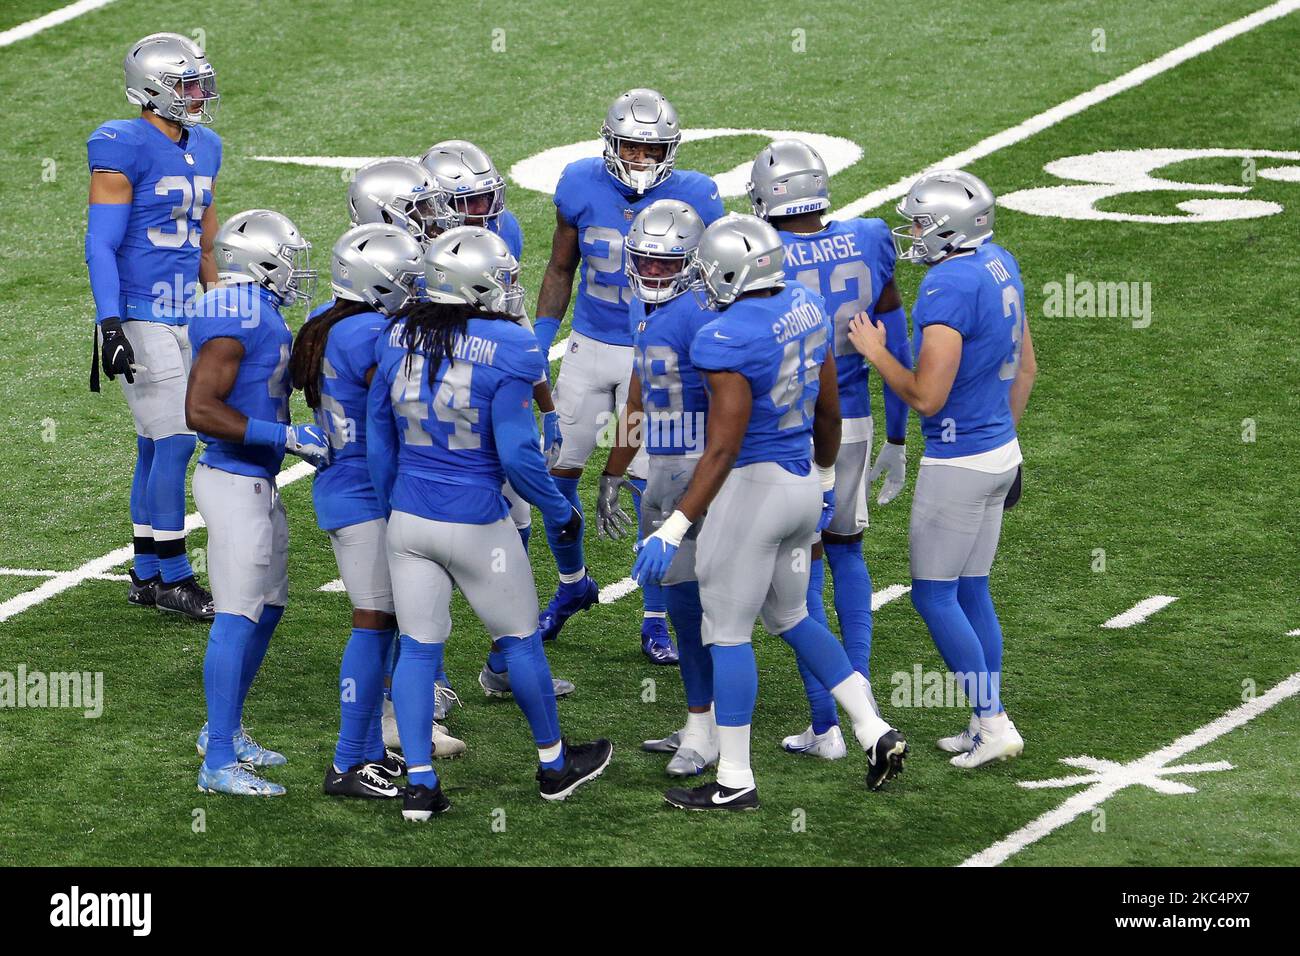 Detroit Lions fullback Jason Cabinda (45), Detroit Lions linebacker Jalen Reeves-Maybin (44), Detroit Lions punter Jack Fox (3), Detroit Lions safety Miles Killebrew (35) discuss a play with teammates during the first half of an NFL football game between the Detroit Lions and the Houston Texans in Detroit, Michigan USA, on Thursday, November 26, 2020. (Photo by Amy Lemus/NurPhoto) Stock Photo